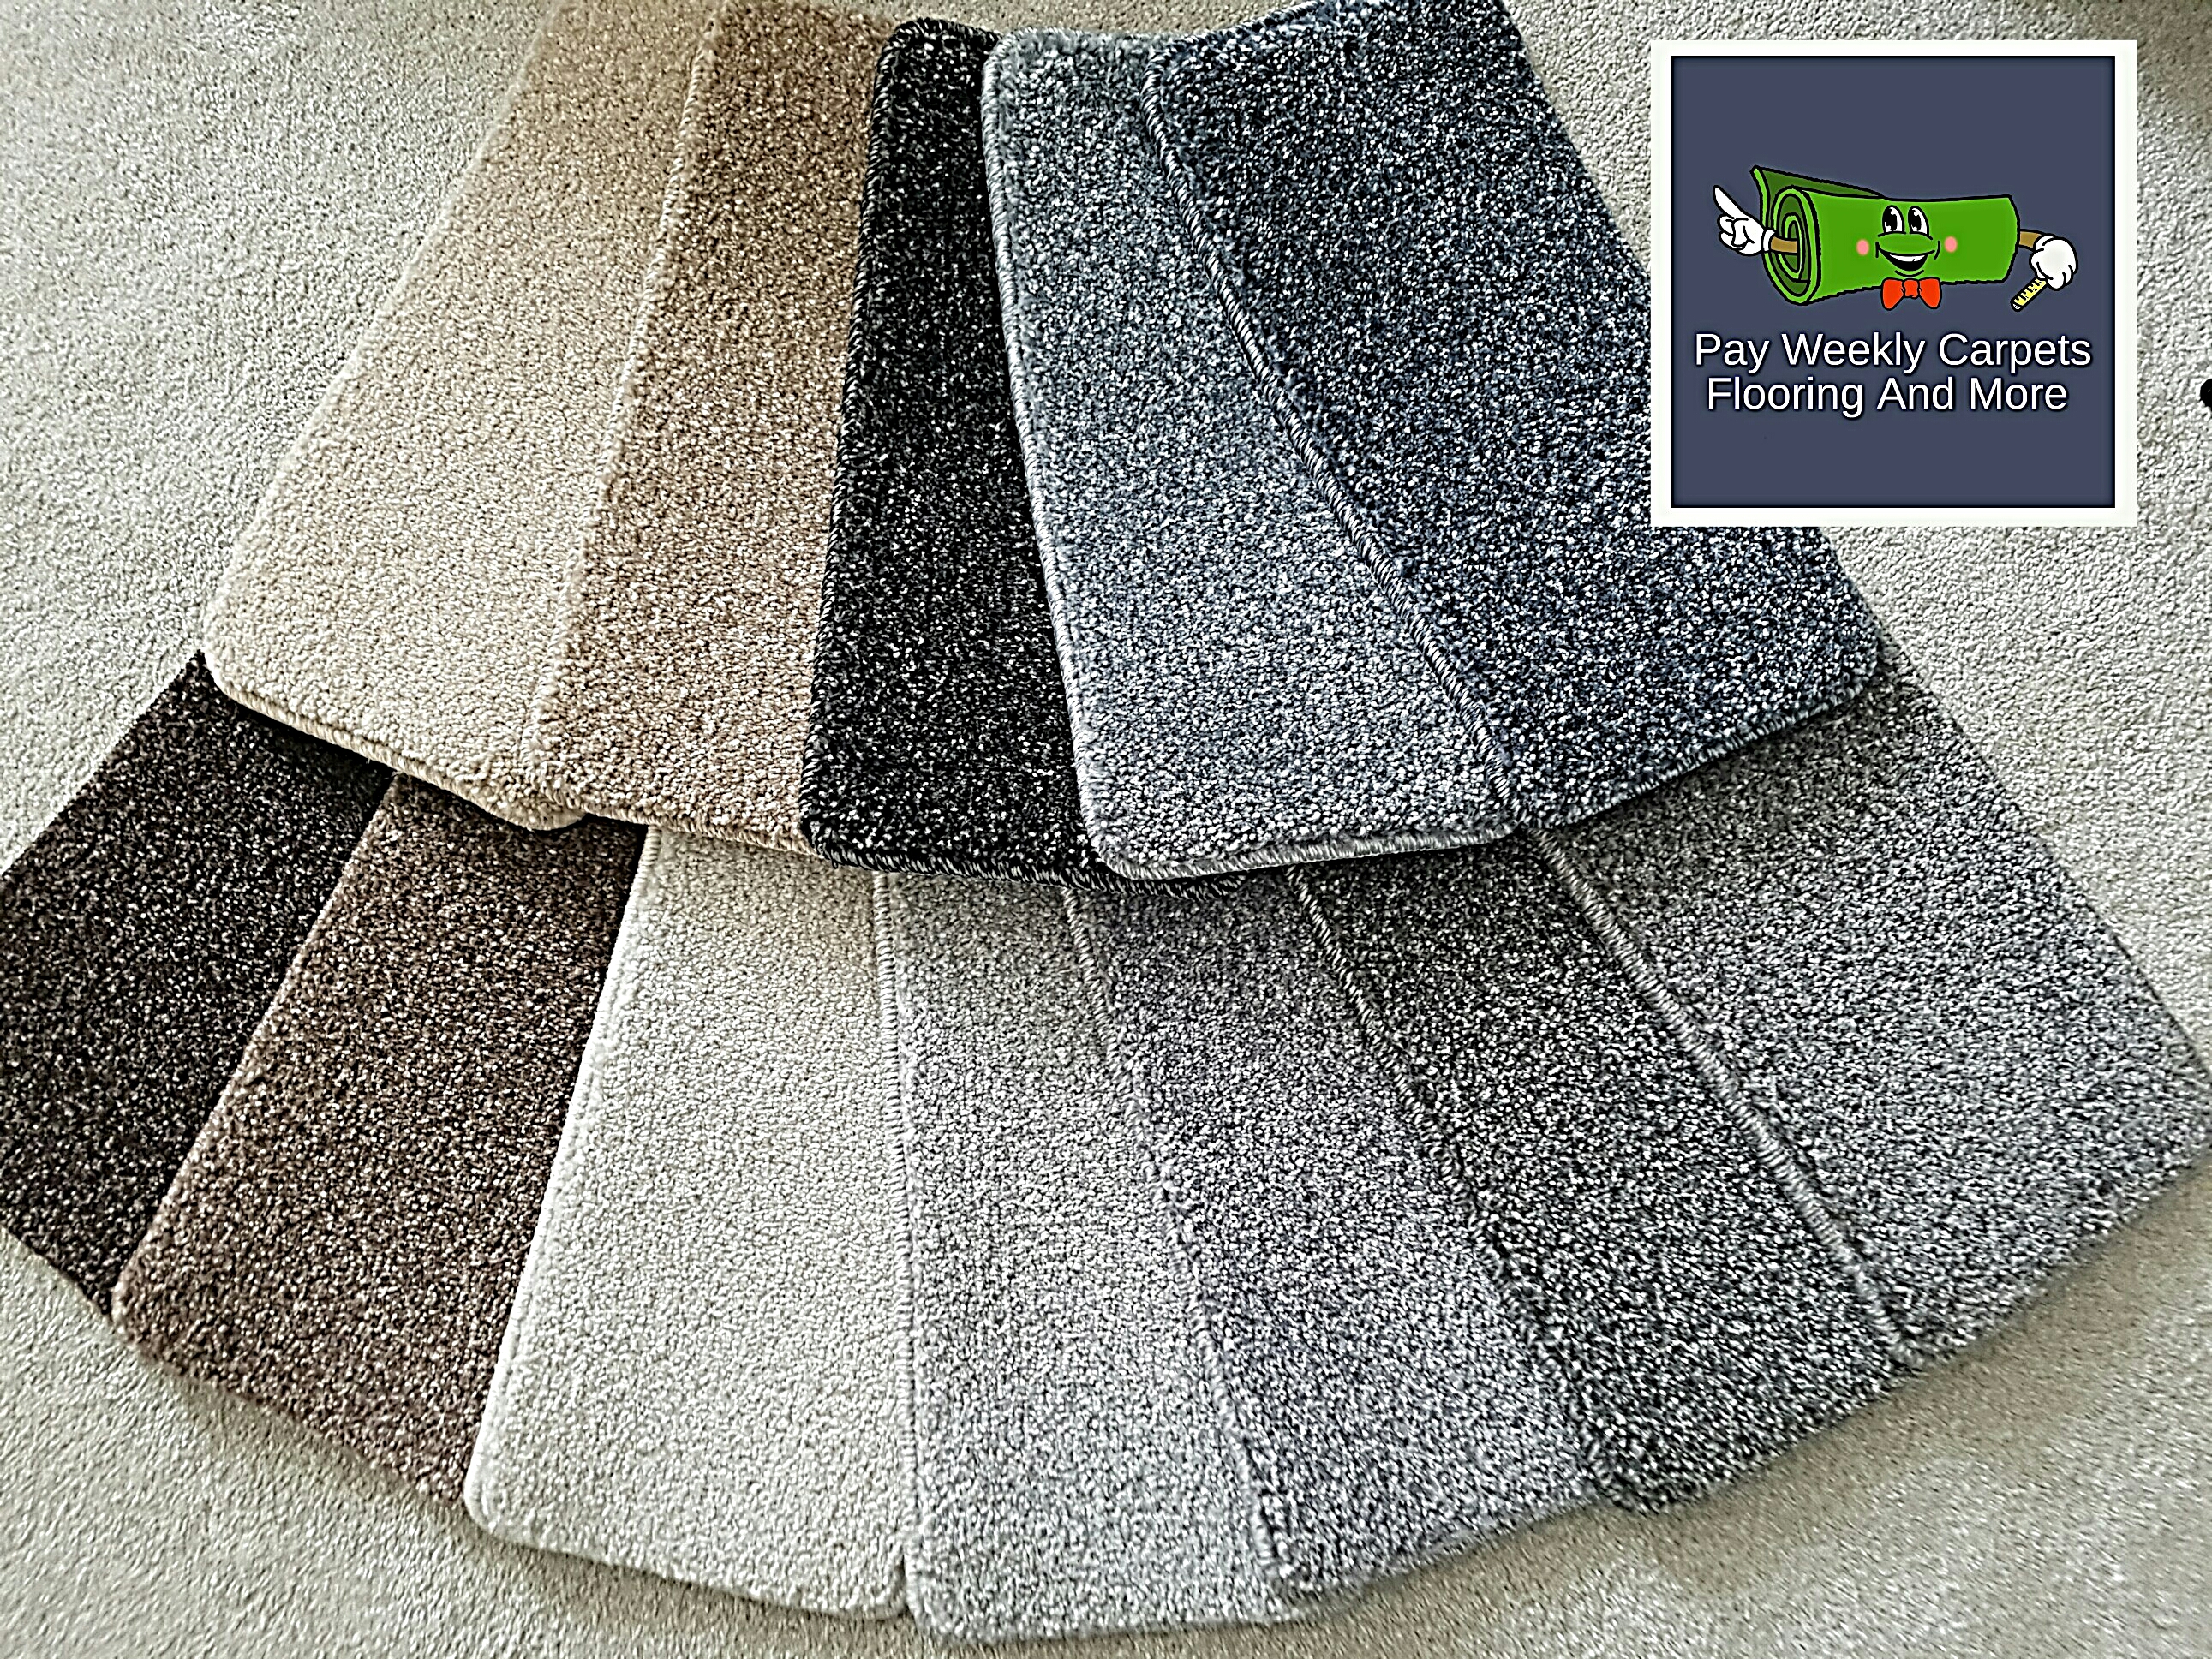 Pay Weekly Carpets Flooring And More Carpet Samples